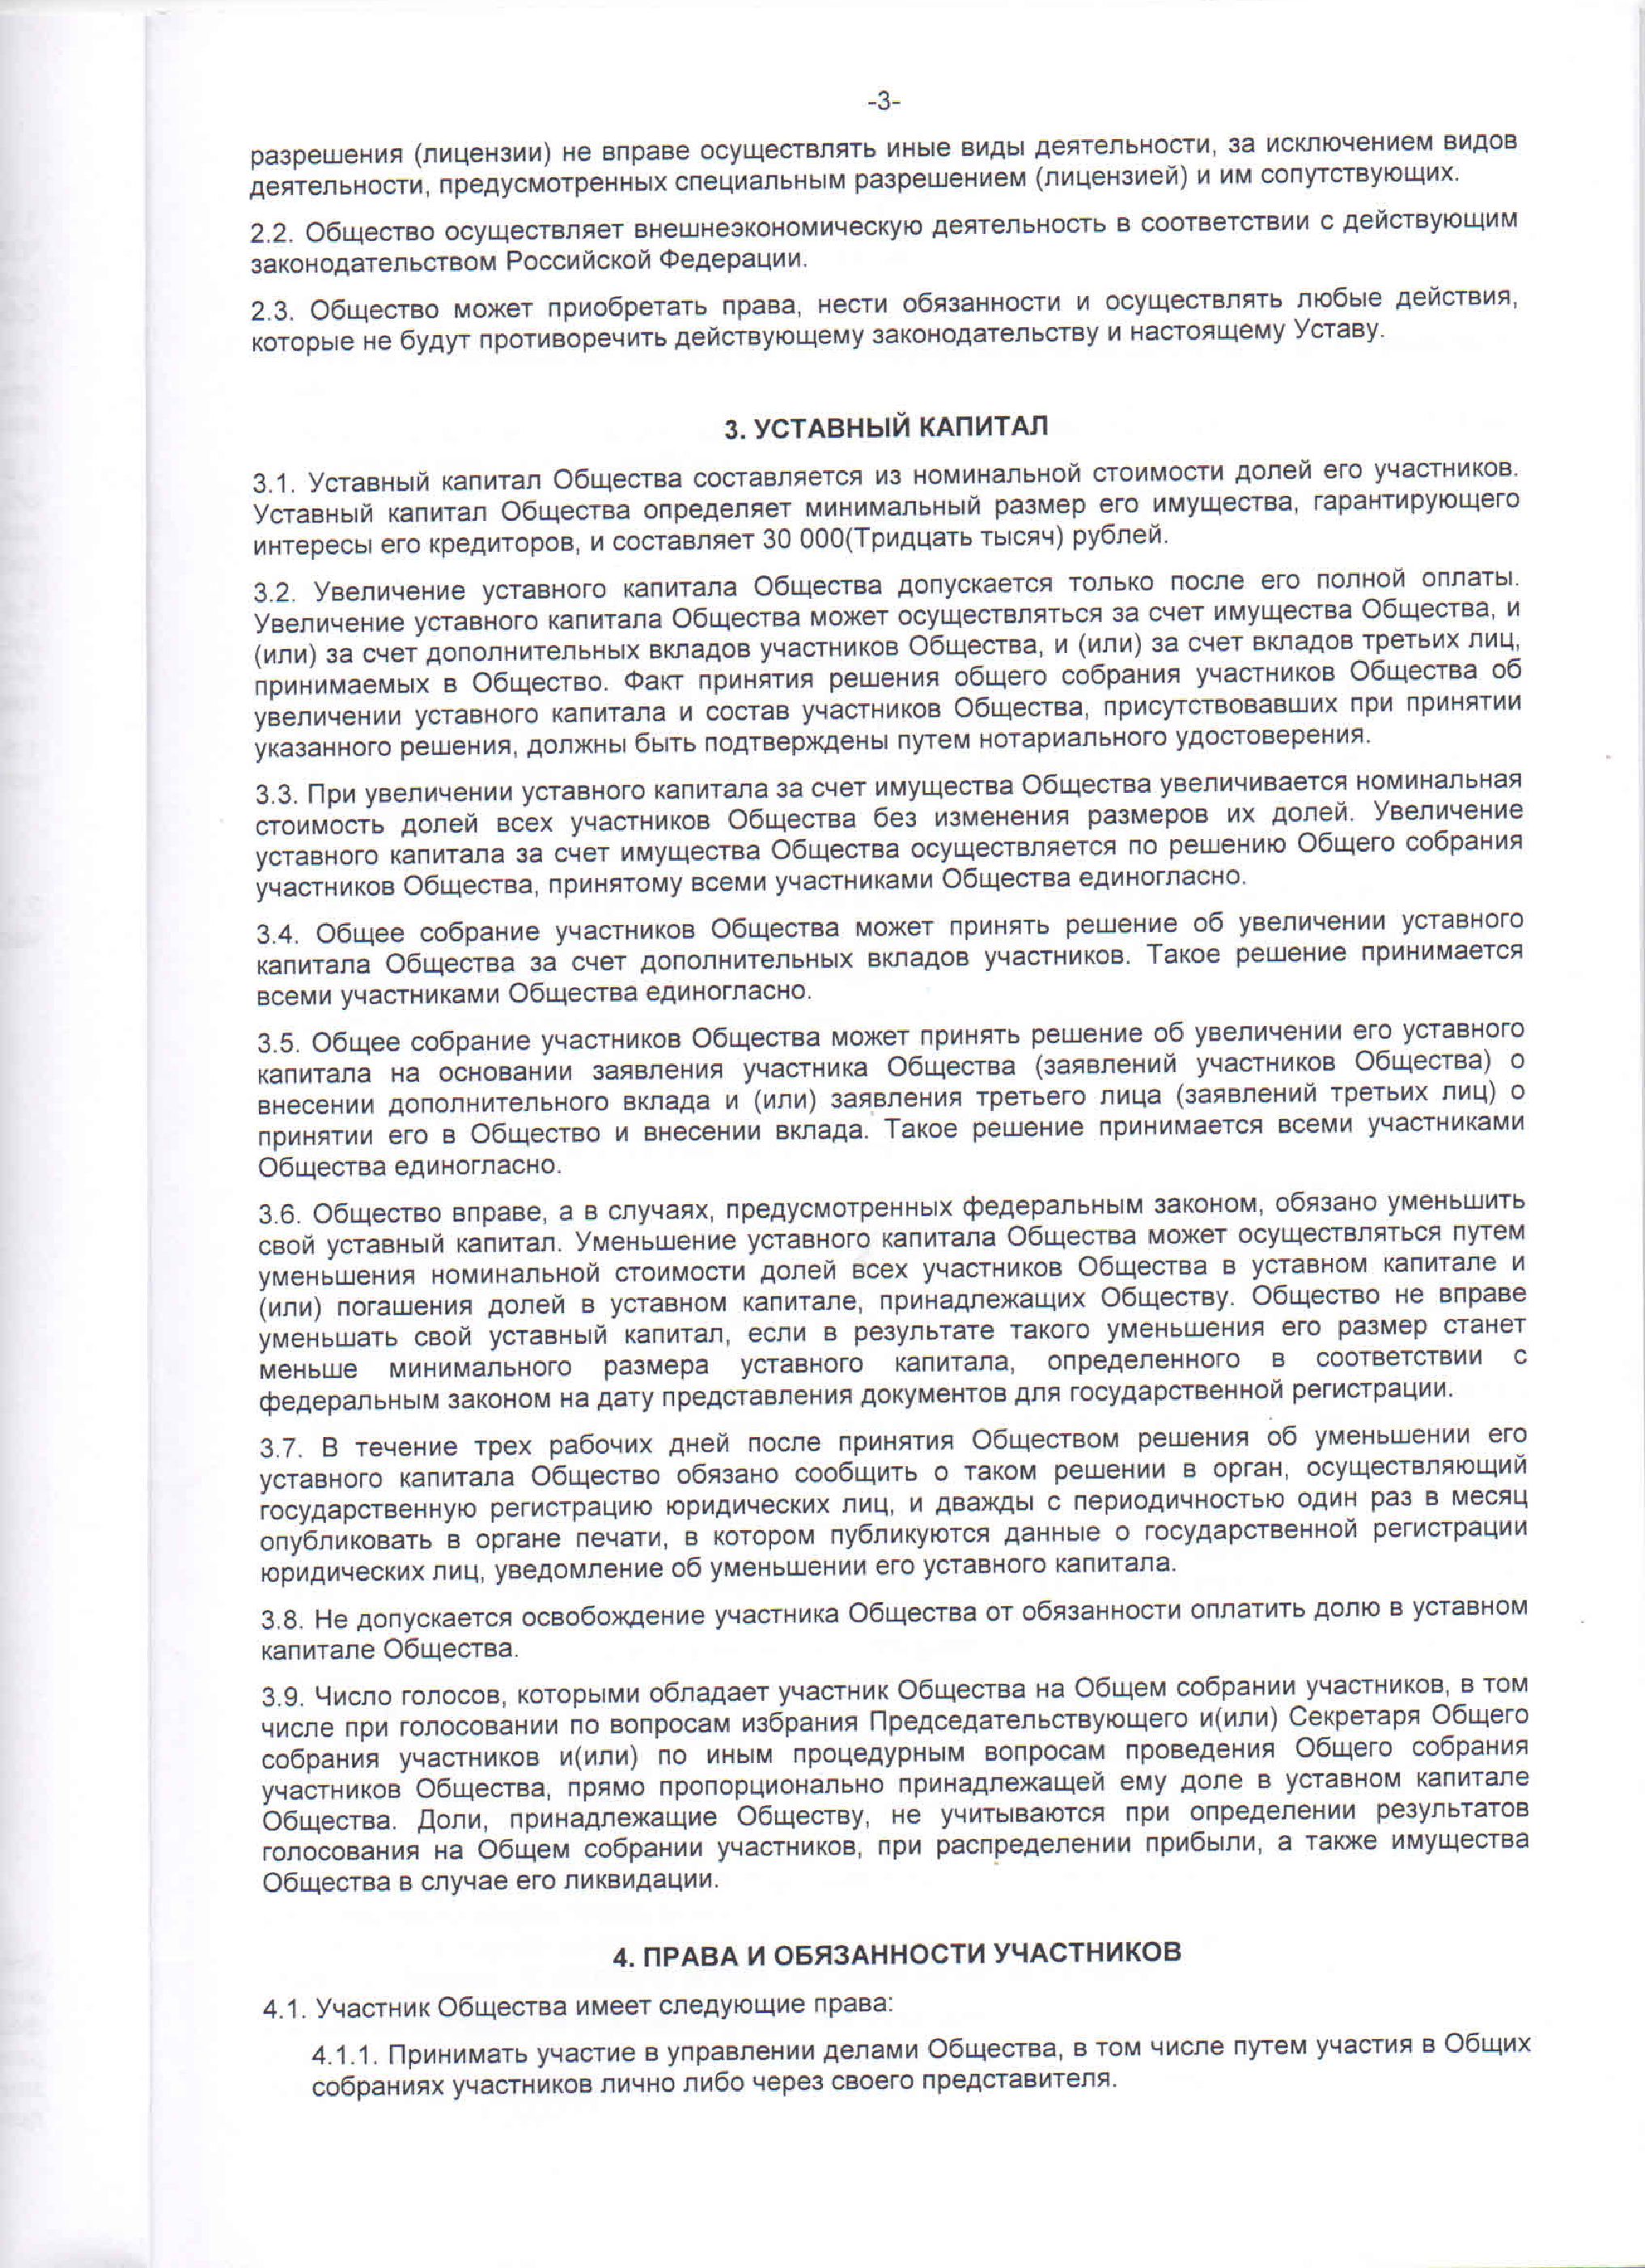 C:\Users\Катюшка\Downloads\imgonline_IMAGES-from-PDF_dqrMe1dgo7\page_0003.jpg